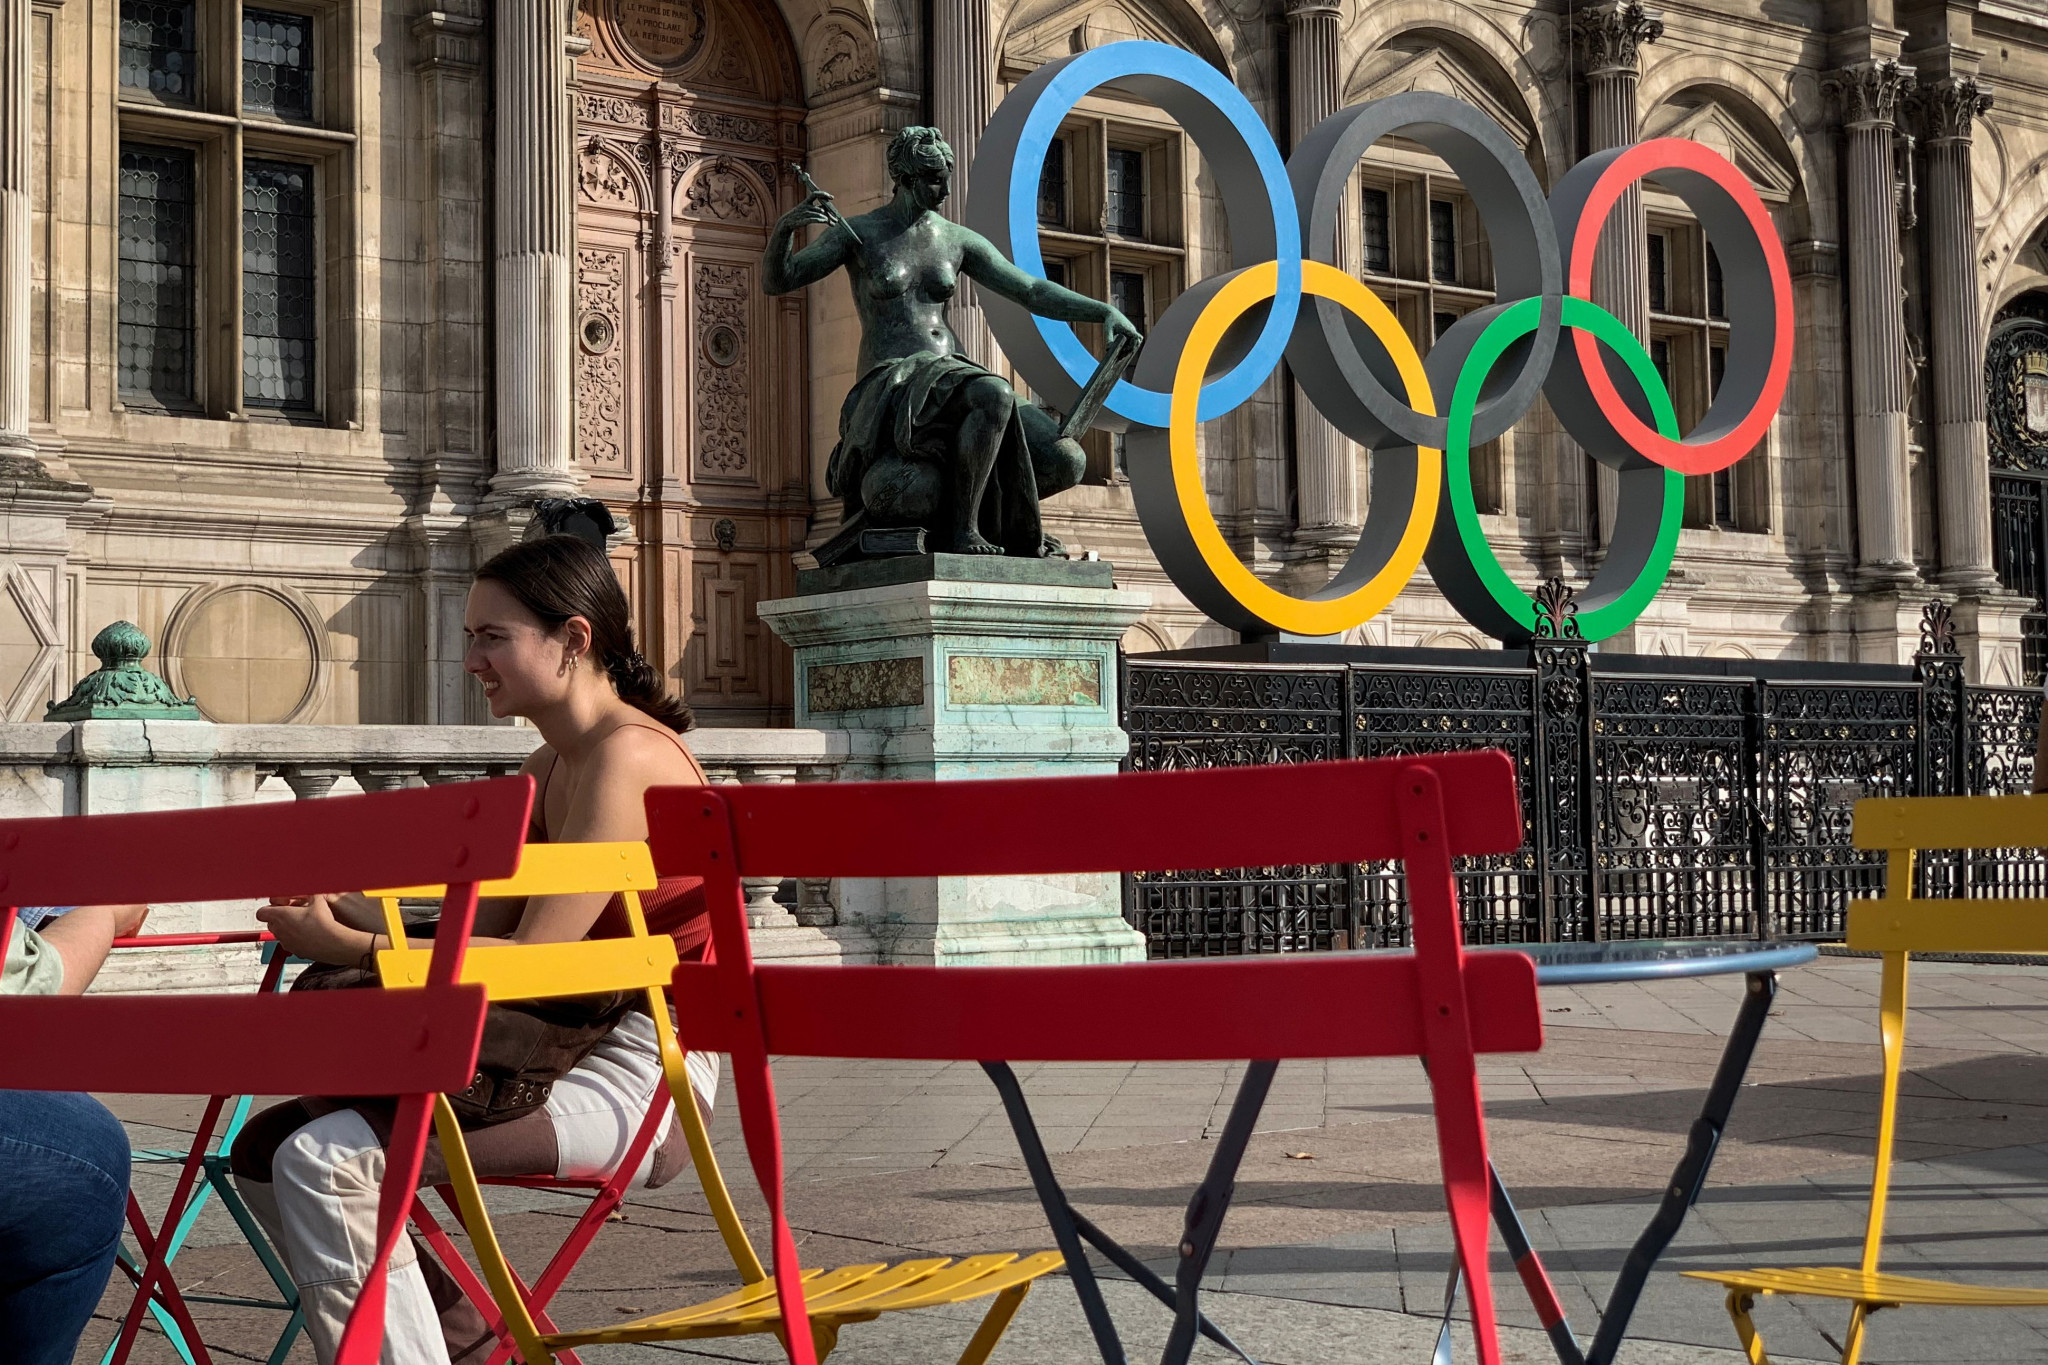 The Olympic rings at the Hôtel de Ville, the city hall, are one of the few visible signs that Paris is preparing to host the Olympics for the first time in 100-years ©Getty Images